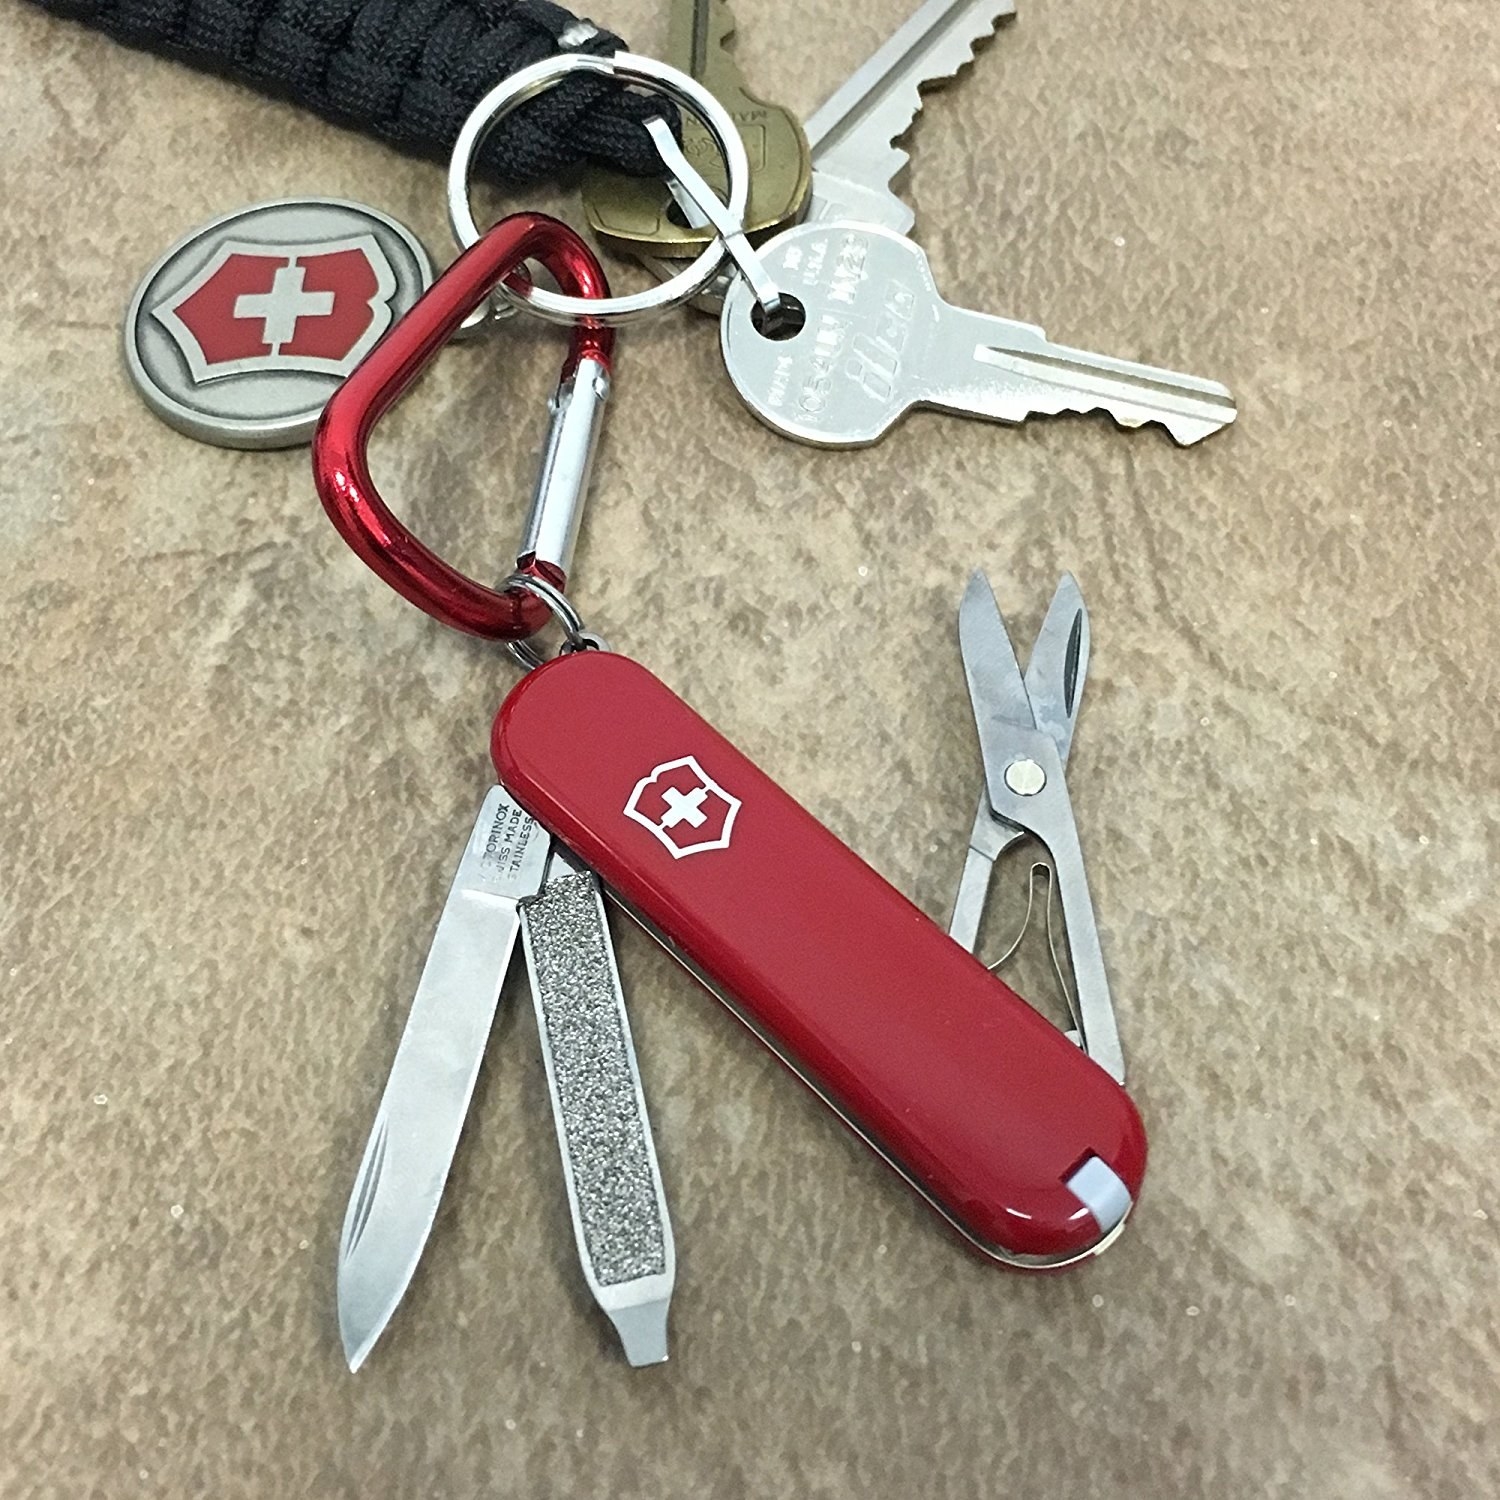 The red swiss army knife showing the various tools